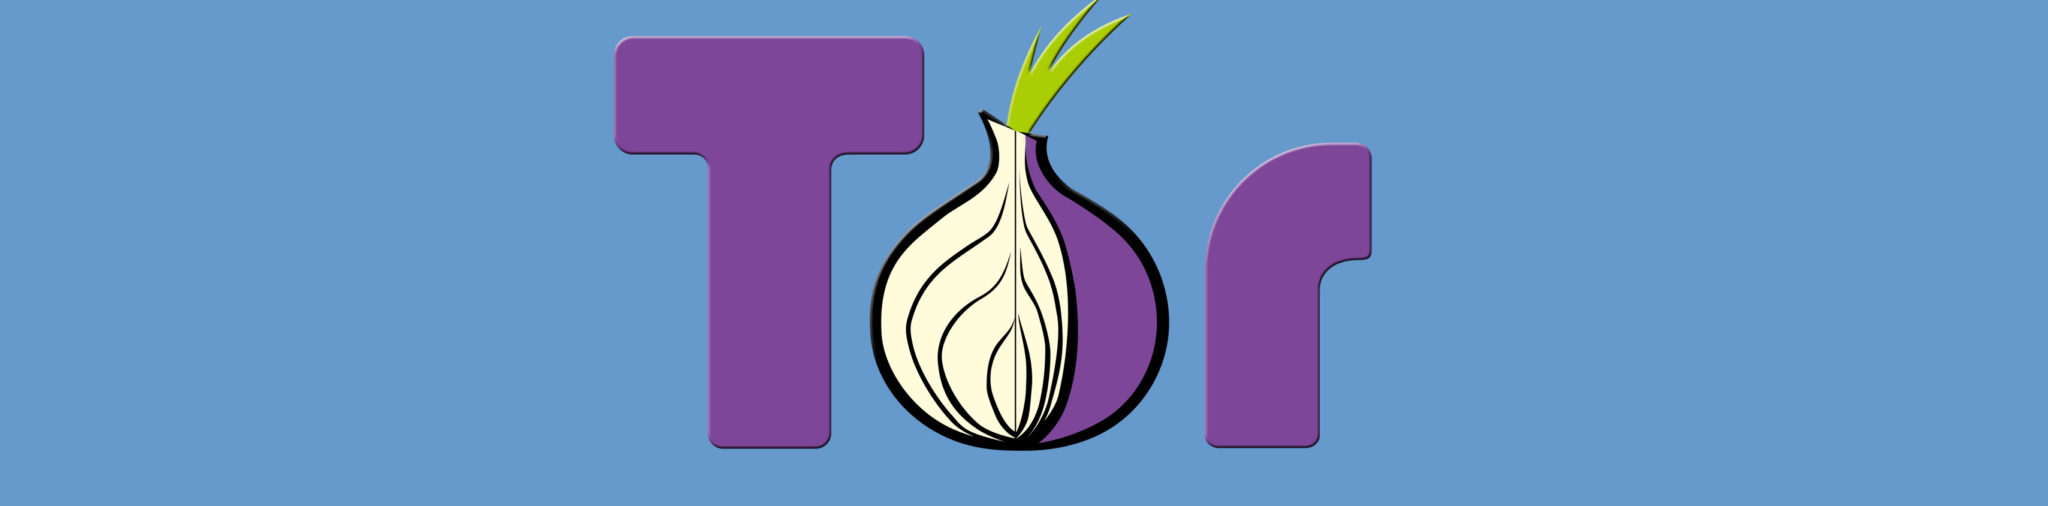 tor browser for android mobile free download